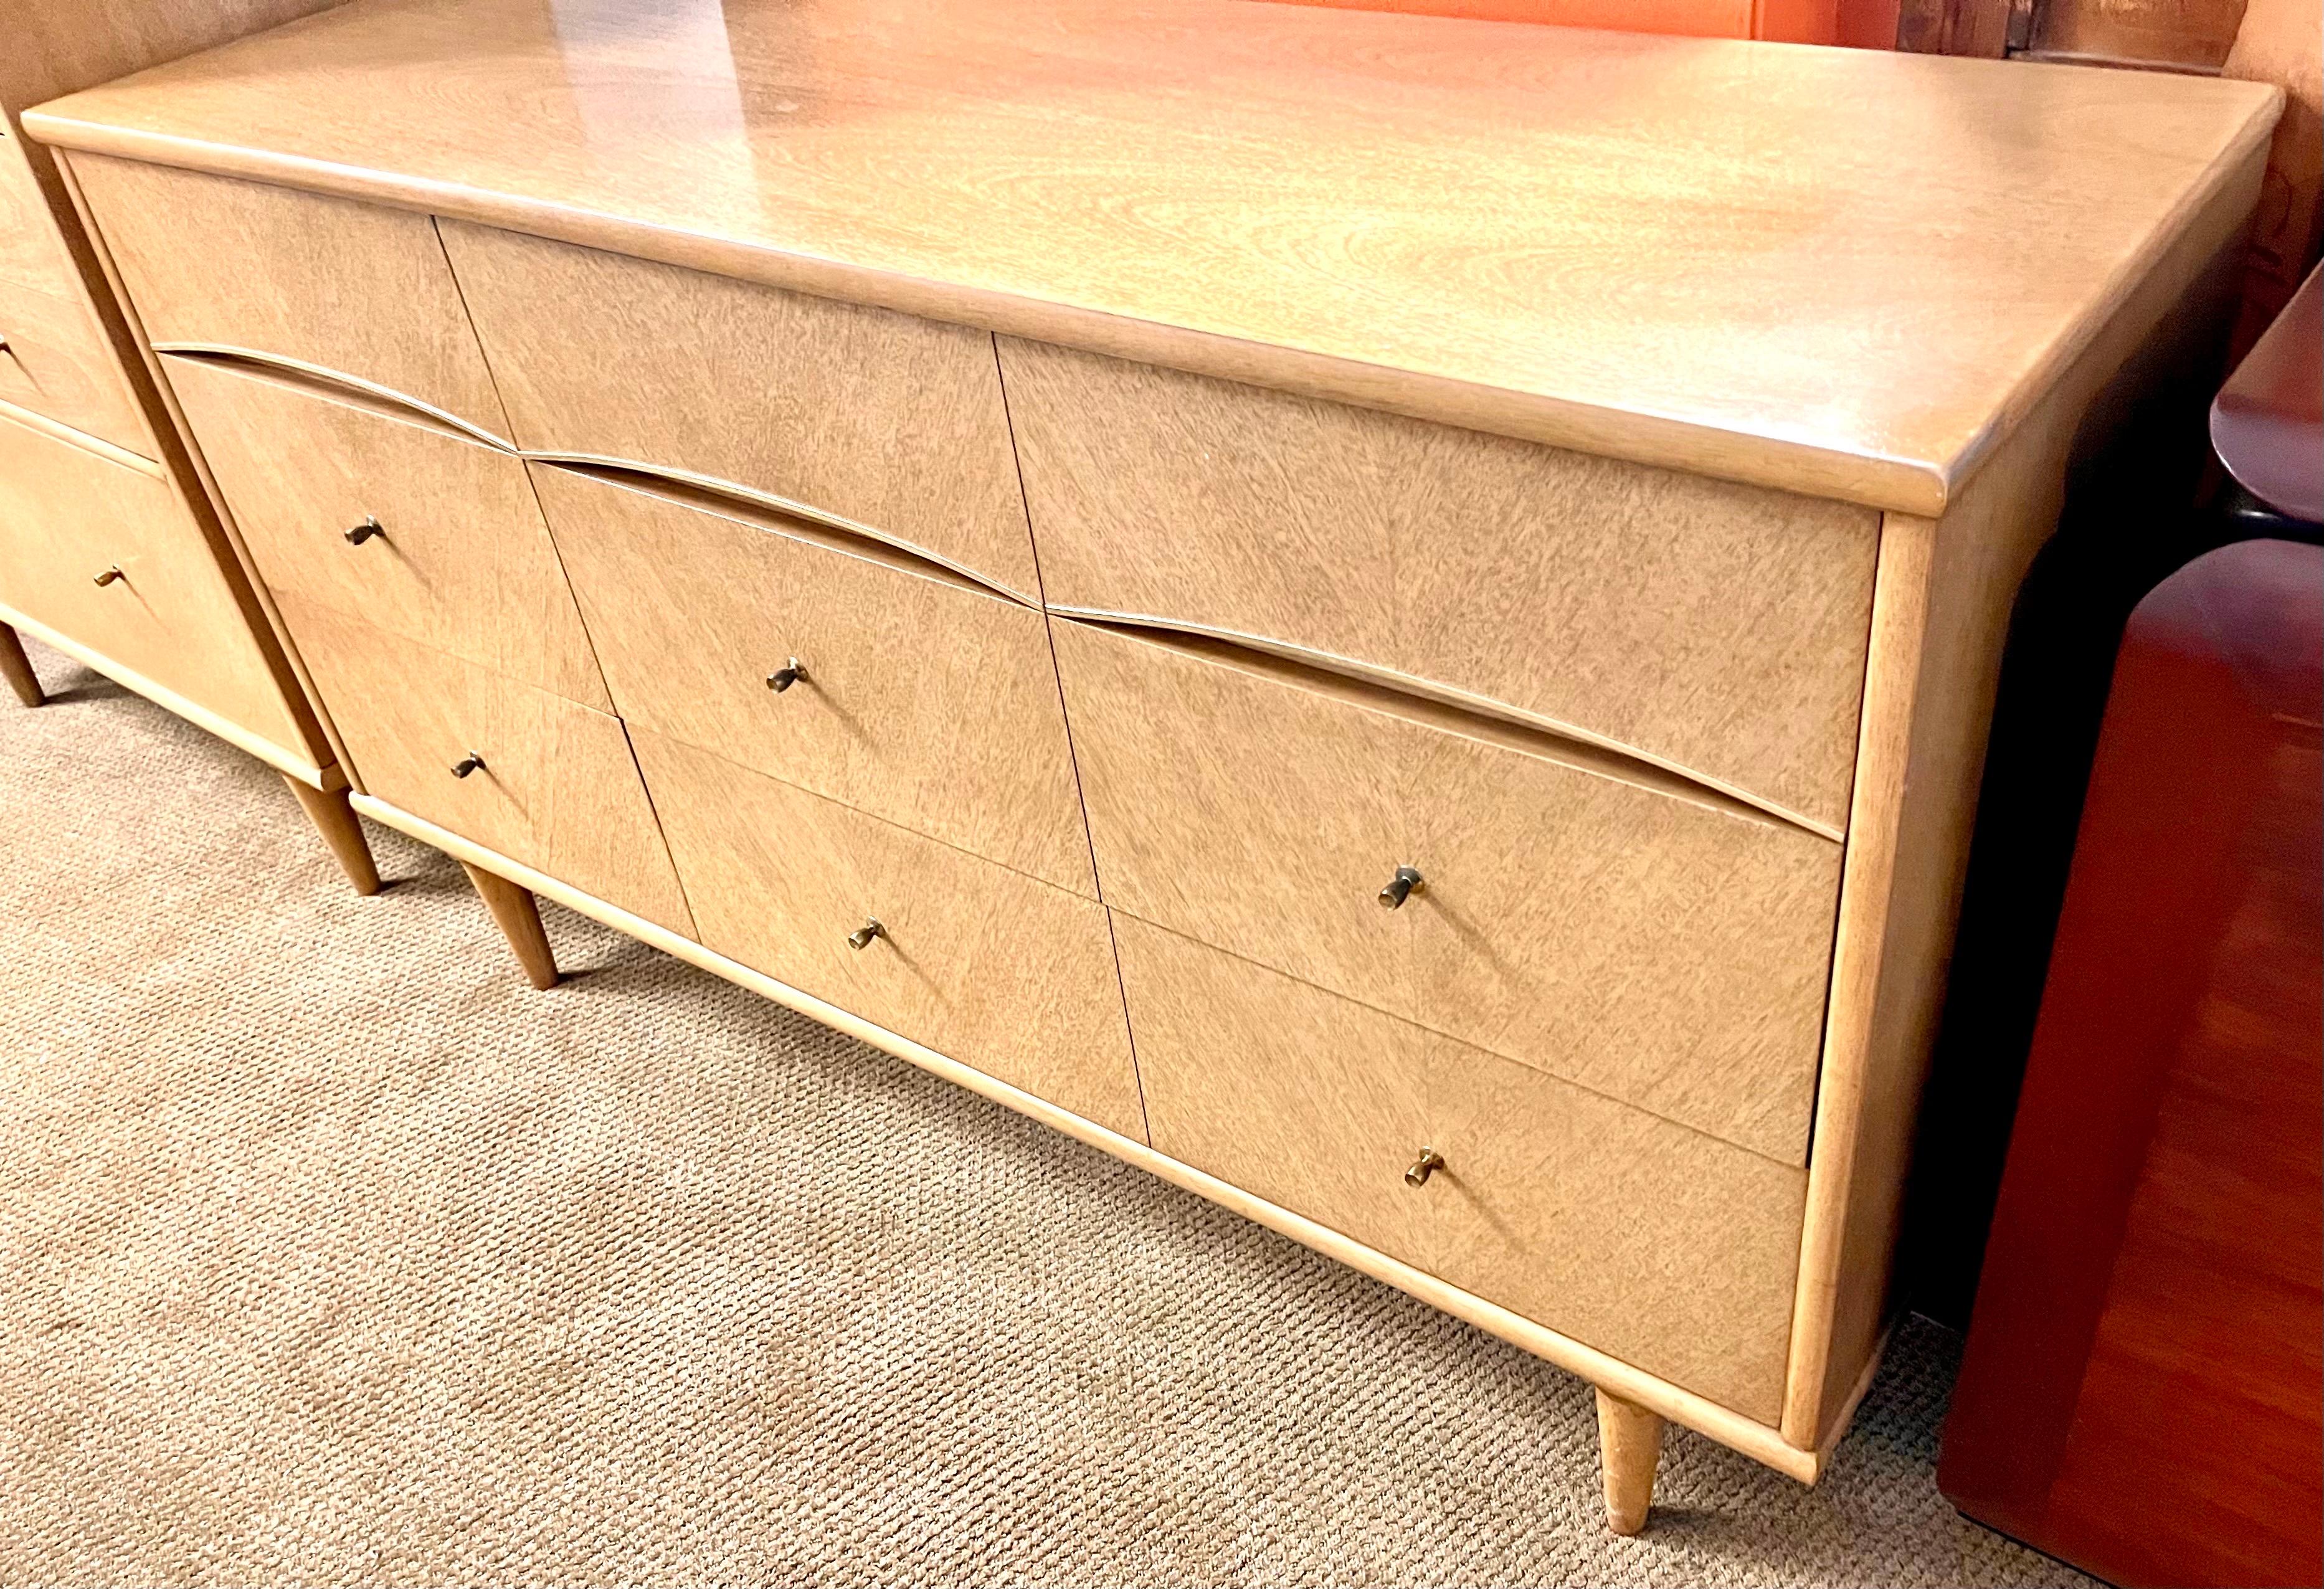 Light wood mid-century Kent Coffey blonde mahogany dresser has six dovetailed drawers (three wide to the right and three short to the left) with original brass pulls. Features decorative brass trim along the bottom edge of the top drawers as well as